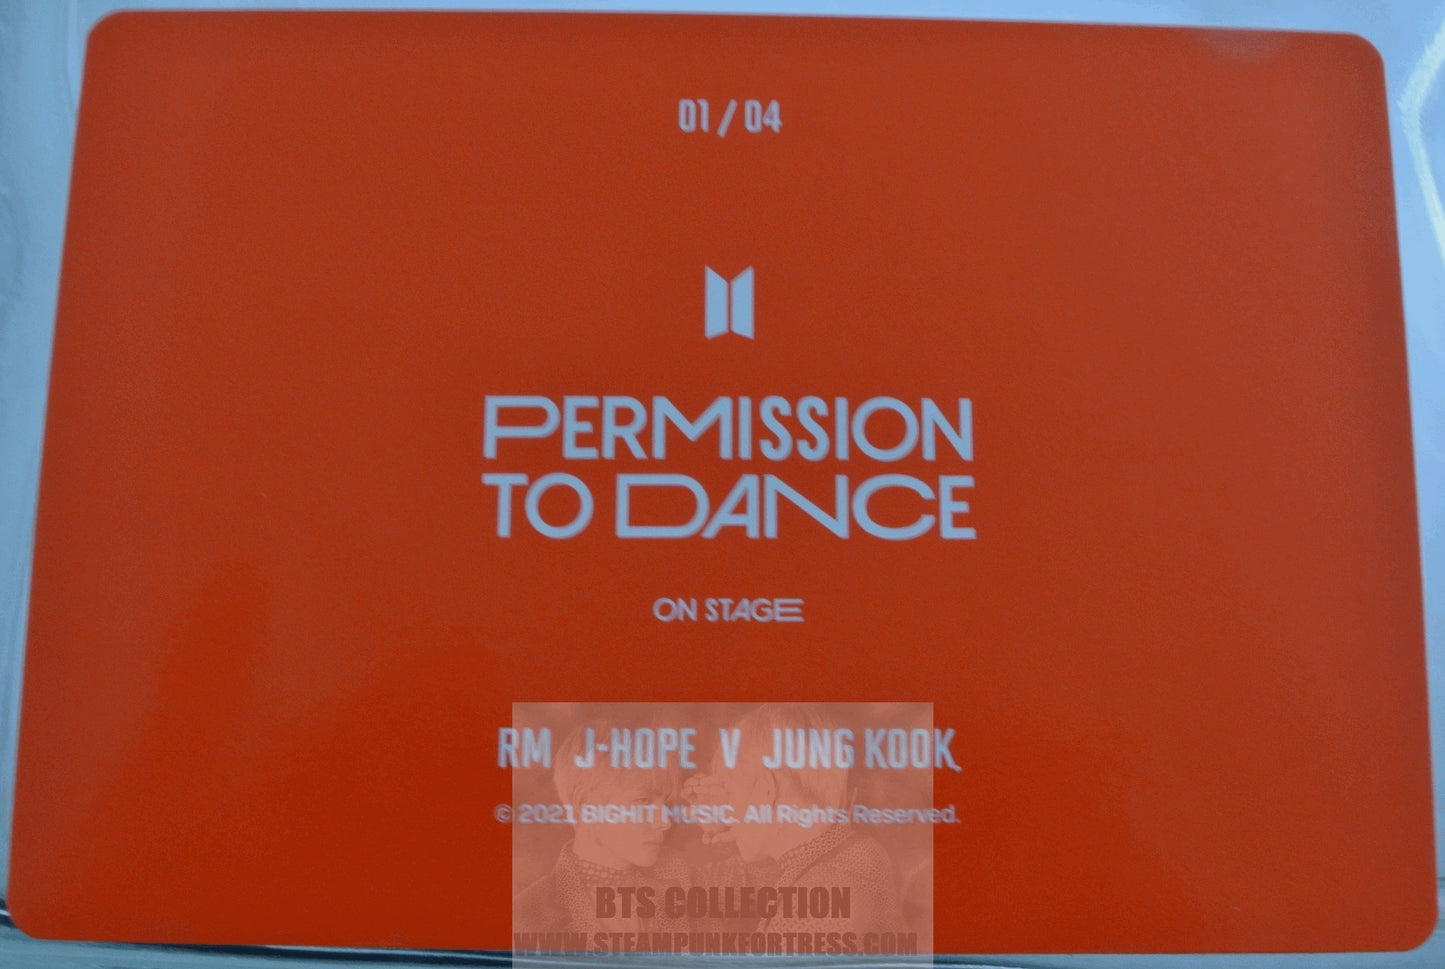 BTS PERMISSION TO DANCE ON STAGE PTD JUNGKOOK JEON V KIM TAEHYUNG JHOPE JUNG HOSEOK RM KIM NAMJOON 2021 PHOTOCARD PHOTO CARD #1 OF 4 NEW OFFICIAL MERCHANDISE